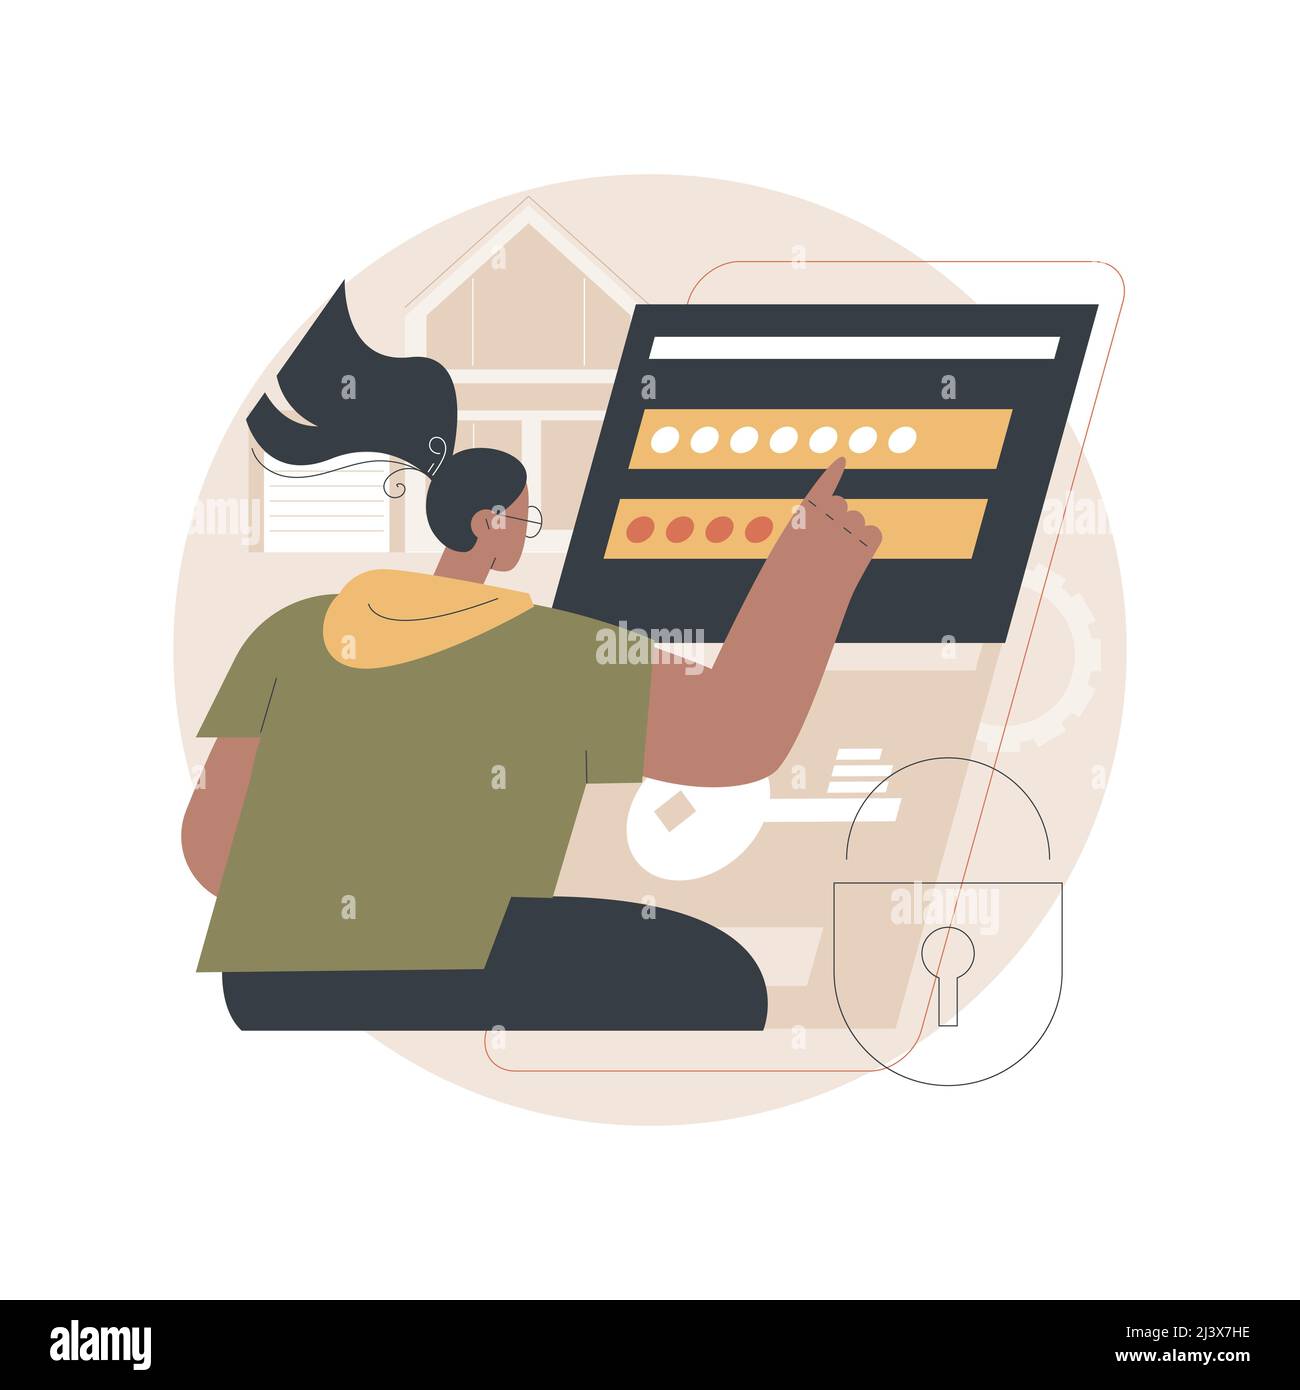 Access control system abstract concept vector illustration. Security system, authorize entry, login credentials, electronic access, password, pass-phr Stock Vector